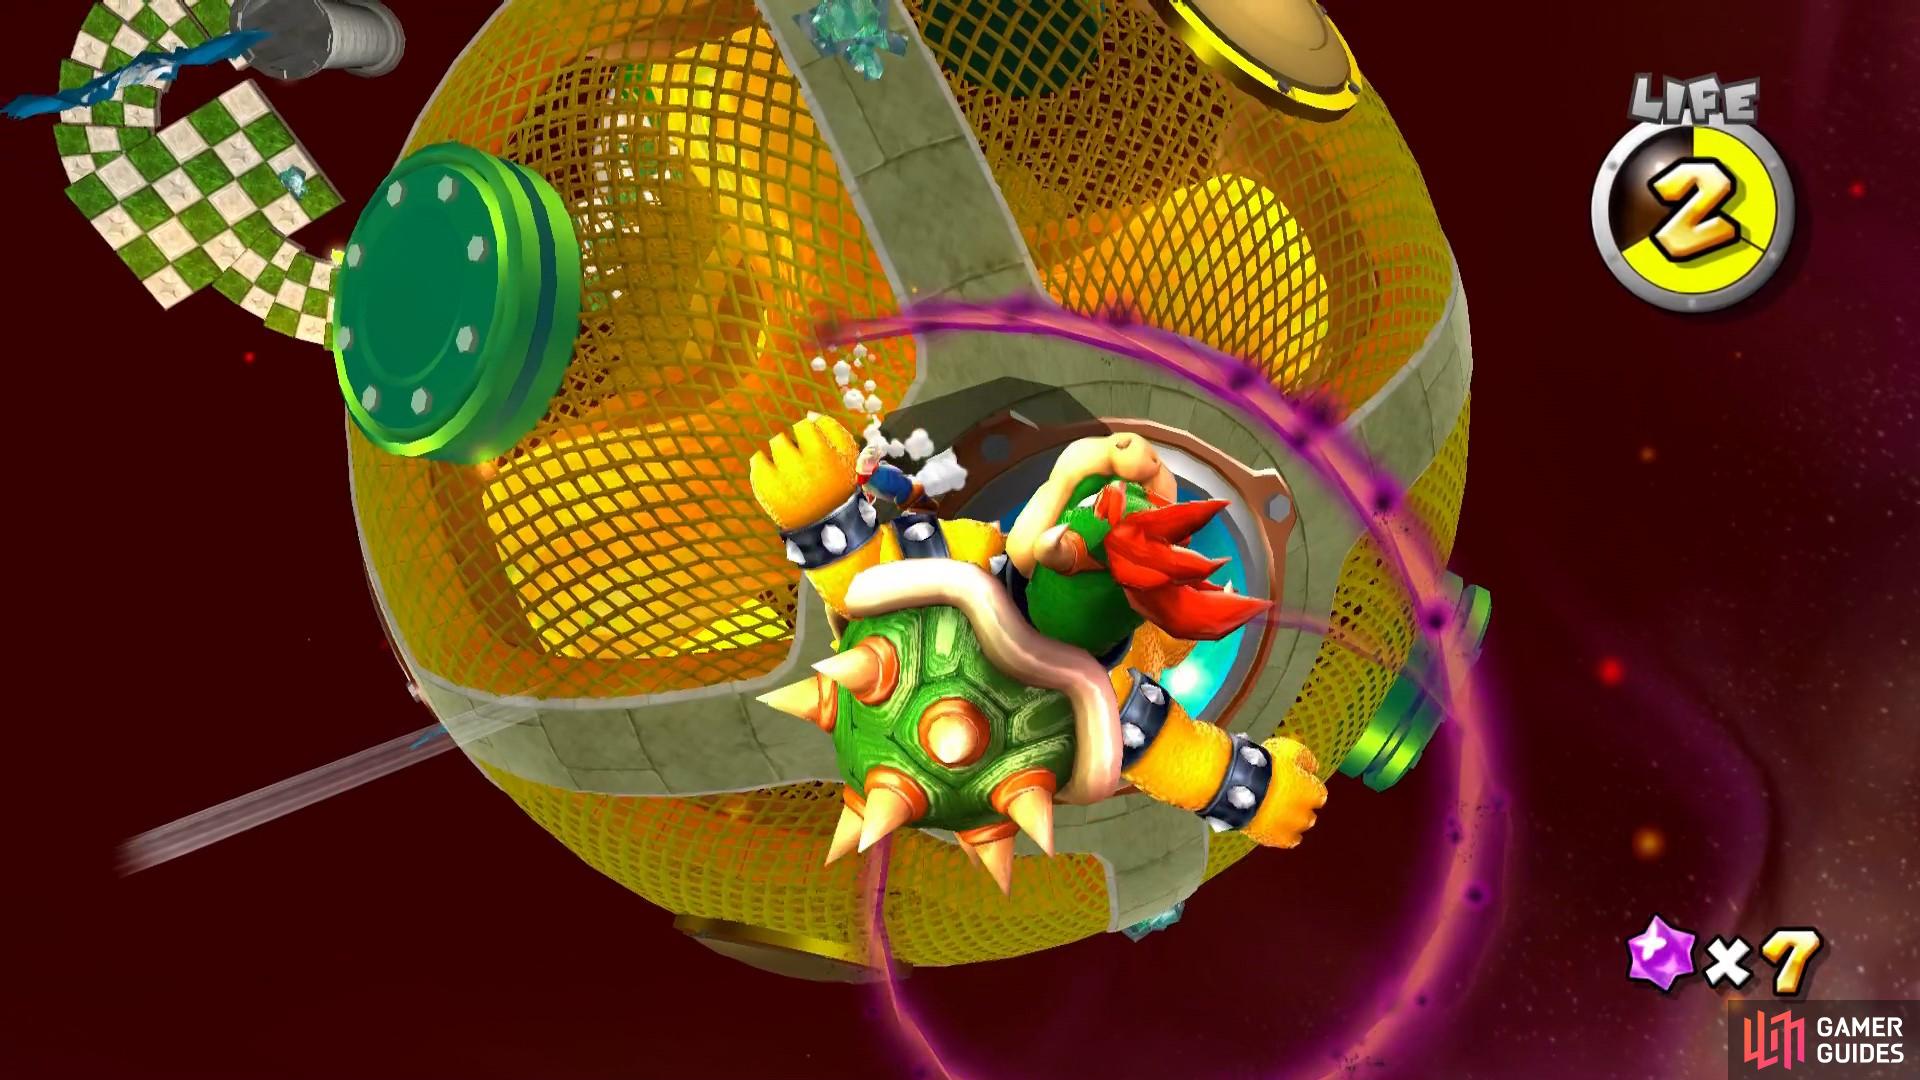 The Dark Spin attack is a new addition to Bowser's attack moves.